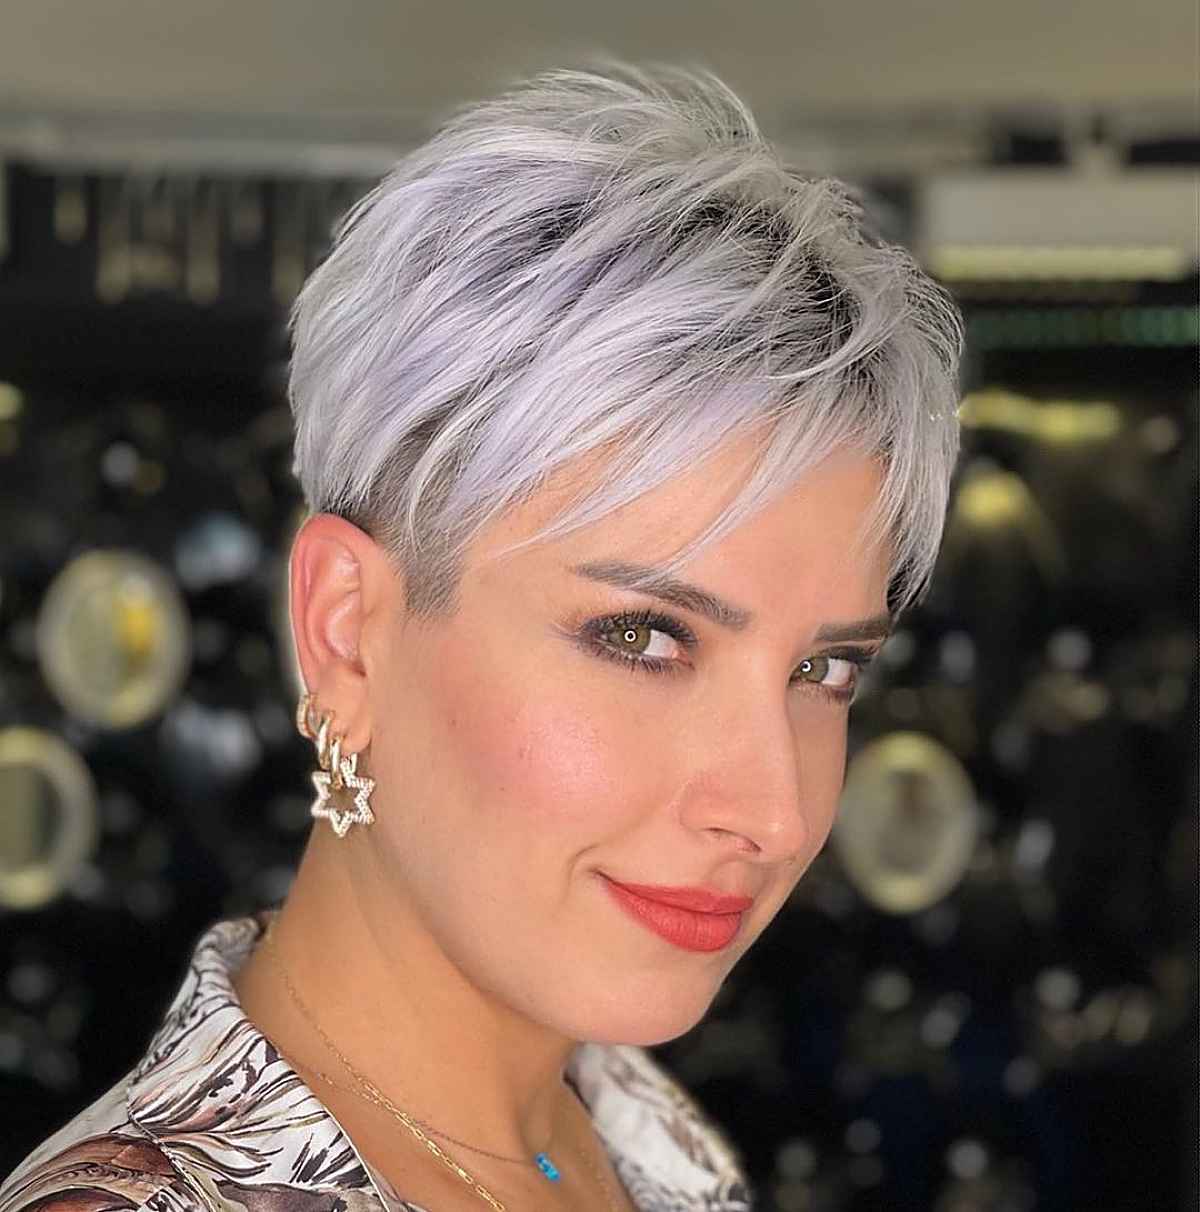 Cute silver pixie with an undercut and bangs